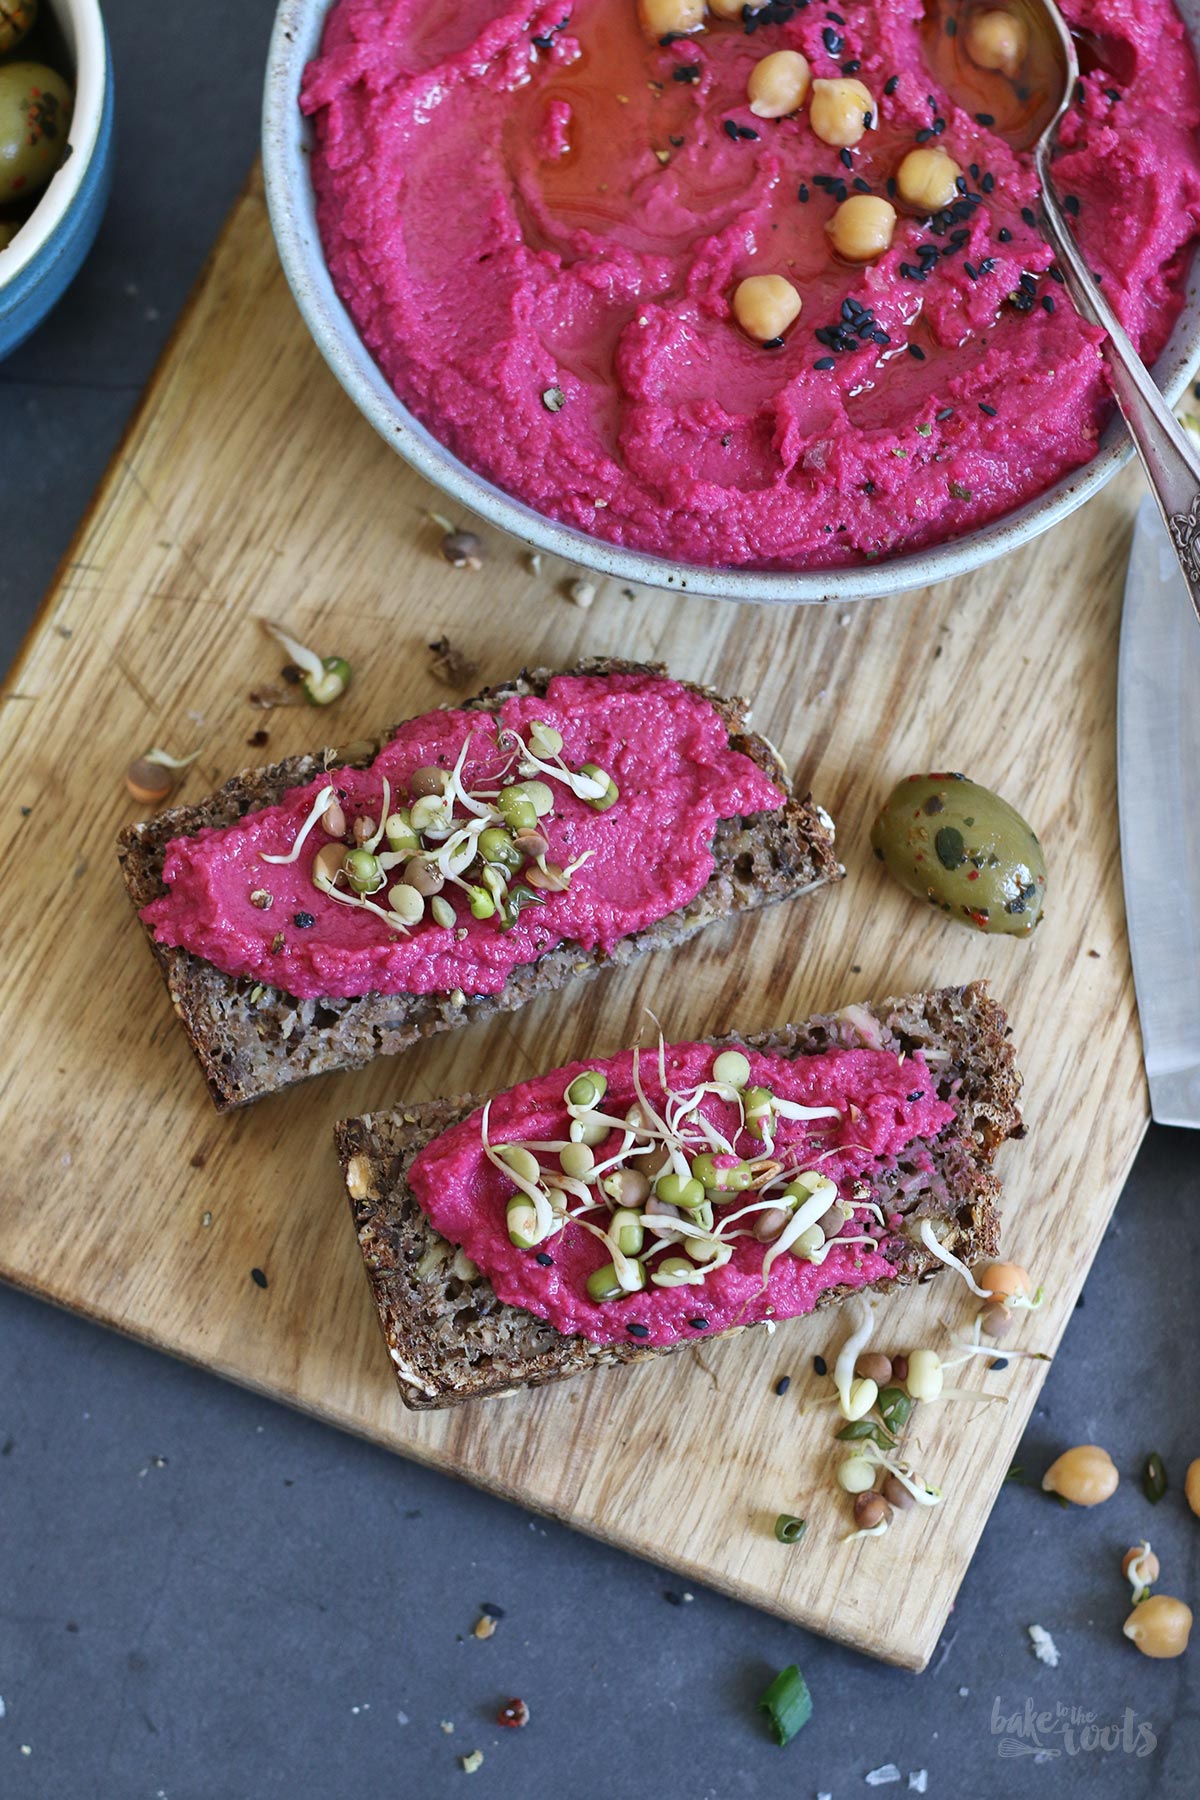 Einfacher Rote Bete Hummus | Bake to the roots